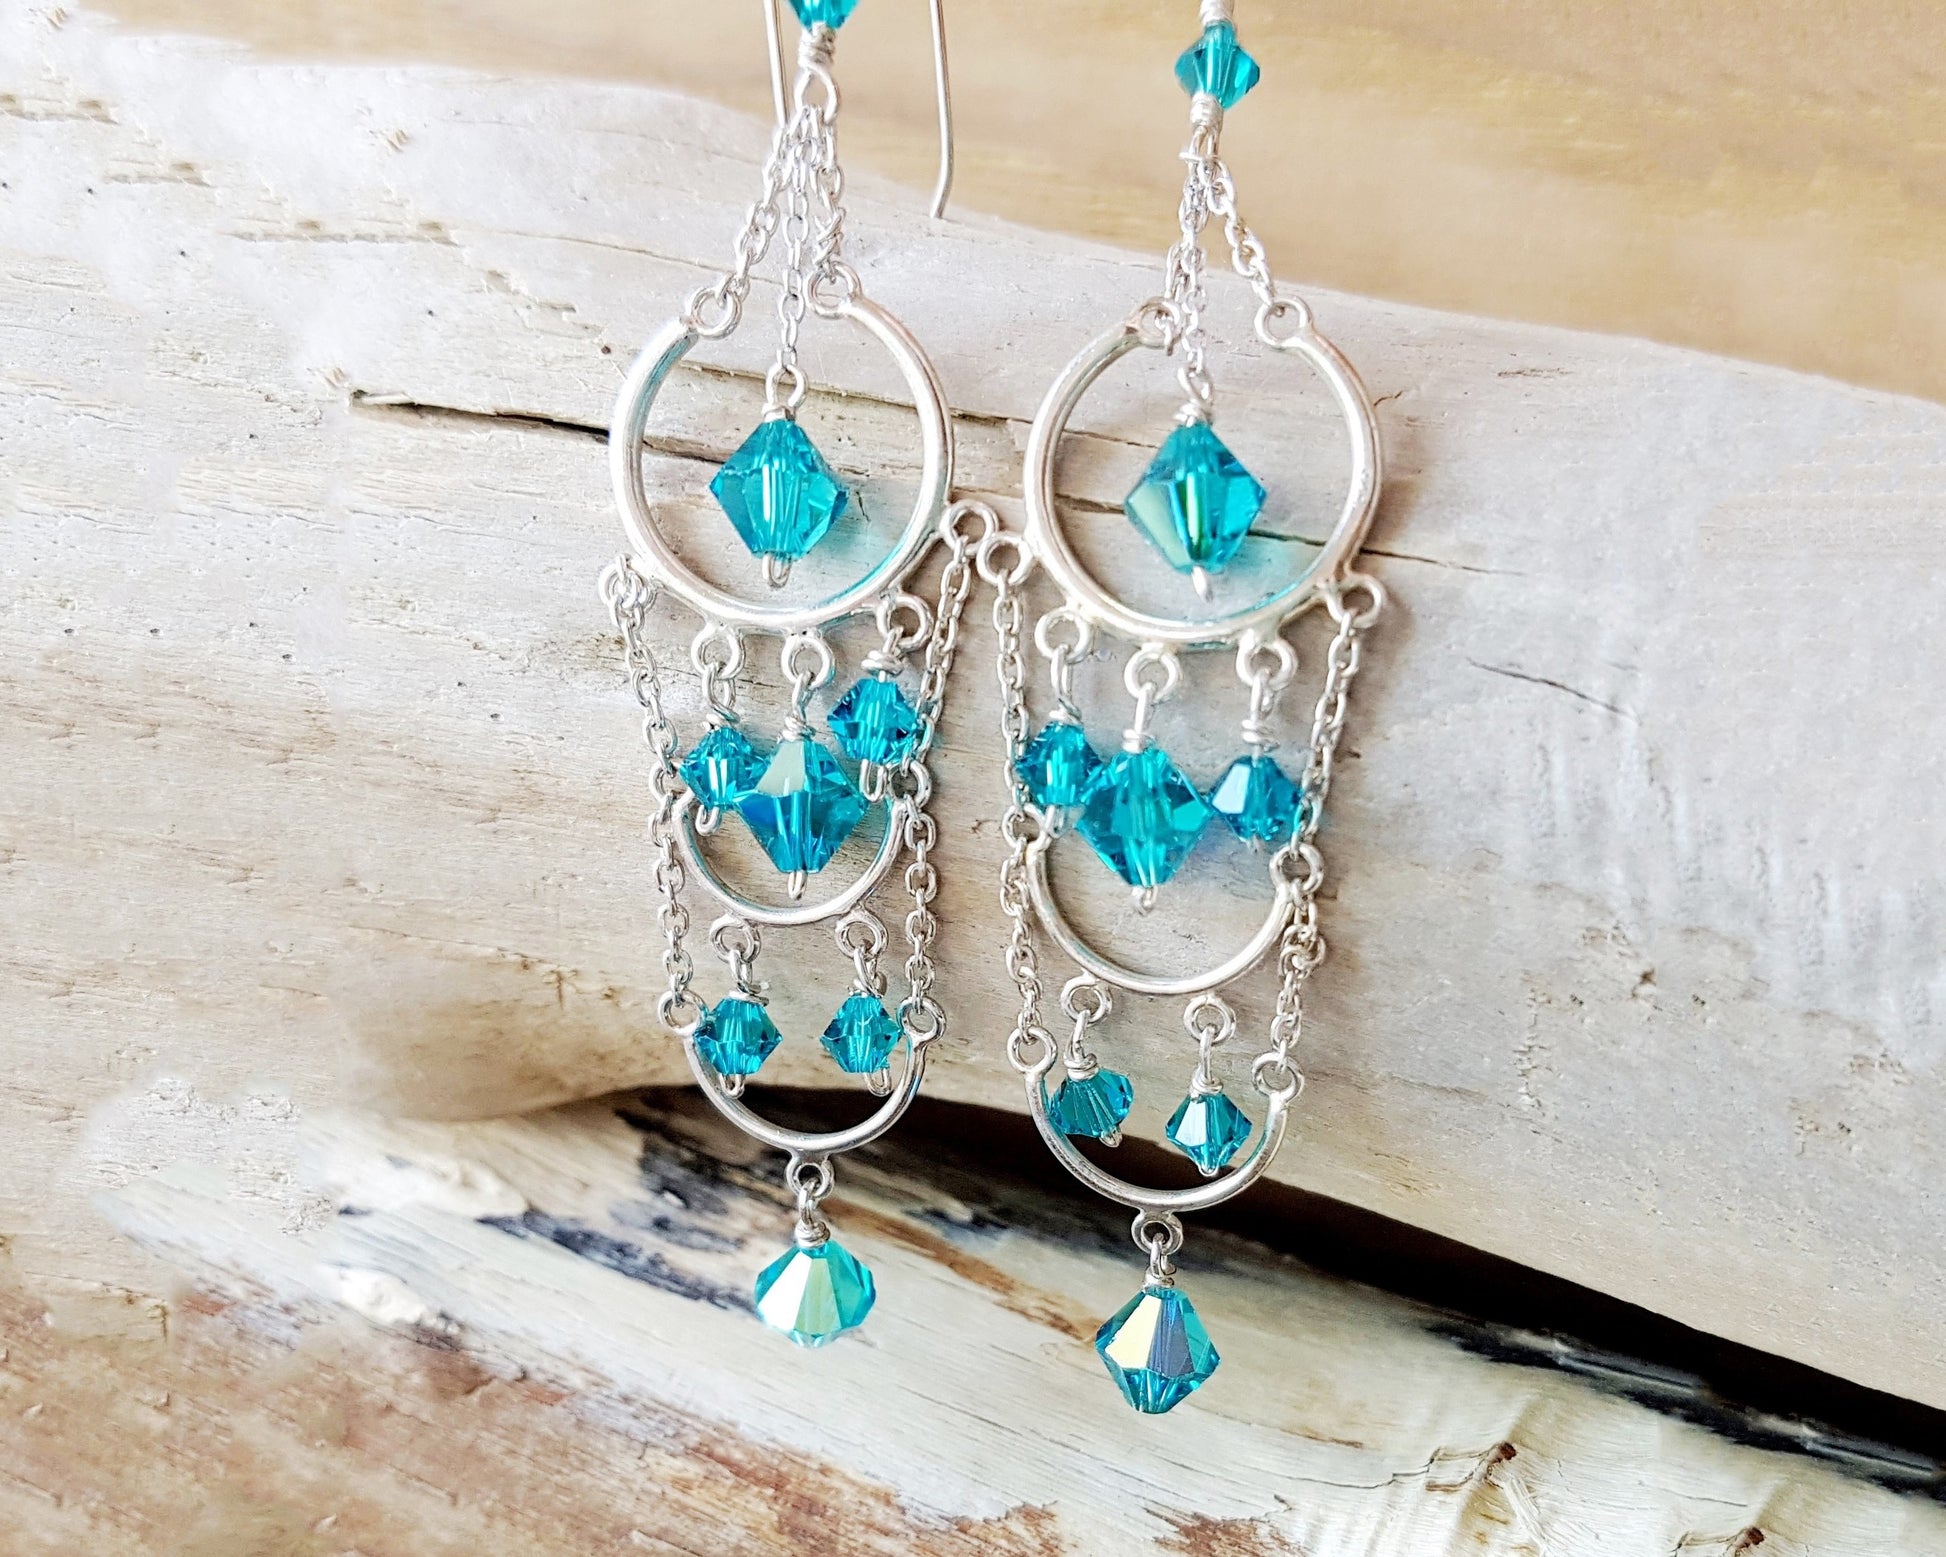 Long Zircon Blue Crystal Chandelier Earrings, Art Deco style, long greenish blue, teal, turquoise crystal on solid sterling silver. 